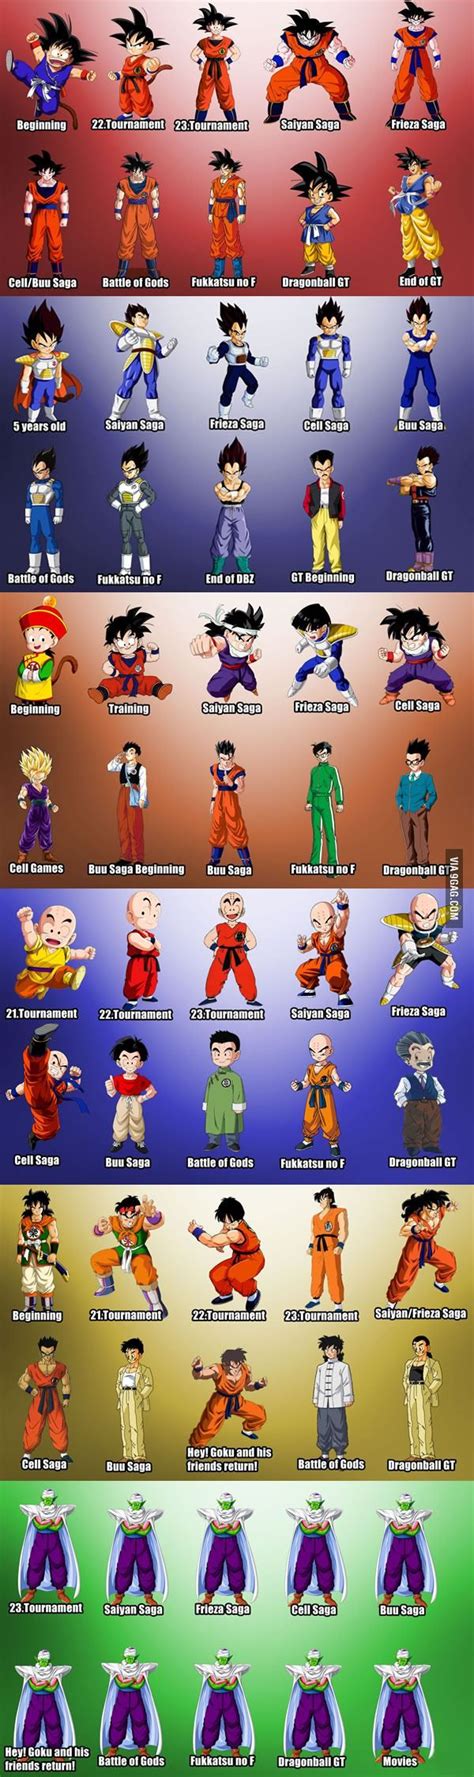 Krillin is the most powerful human in the Dragonball Universe. . Dragon ball character wheel